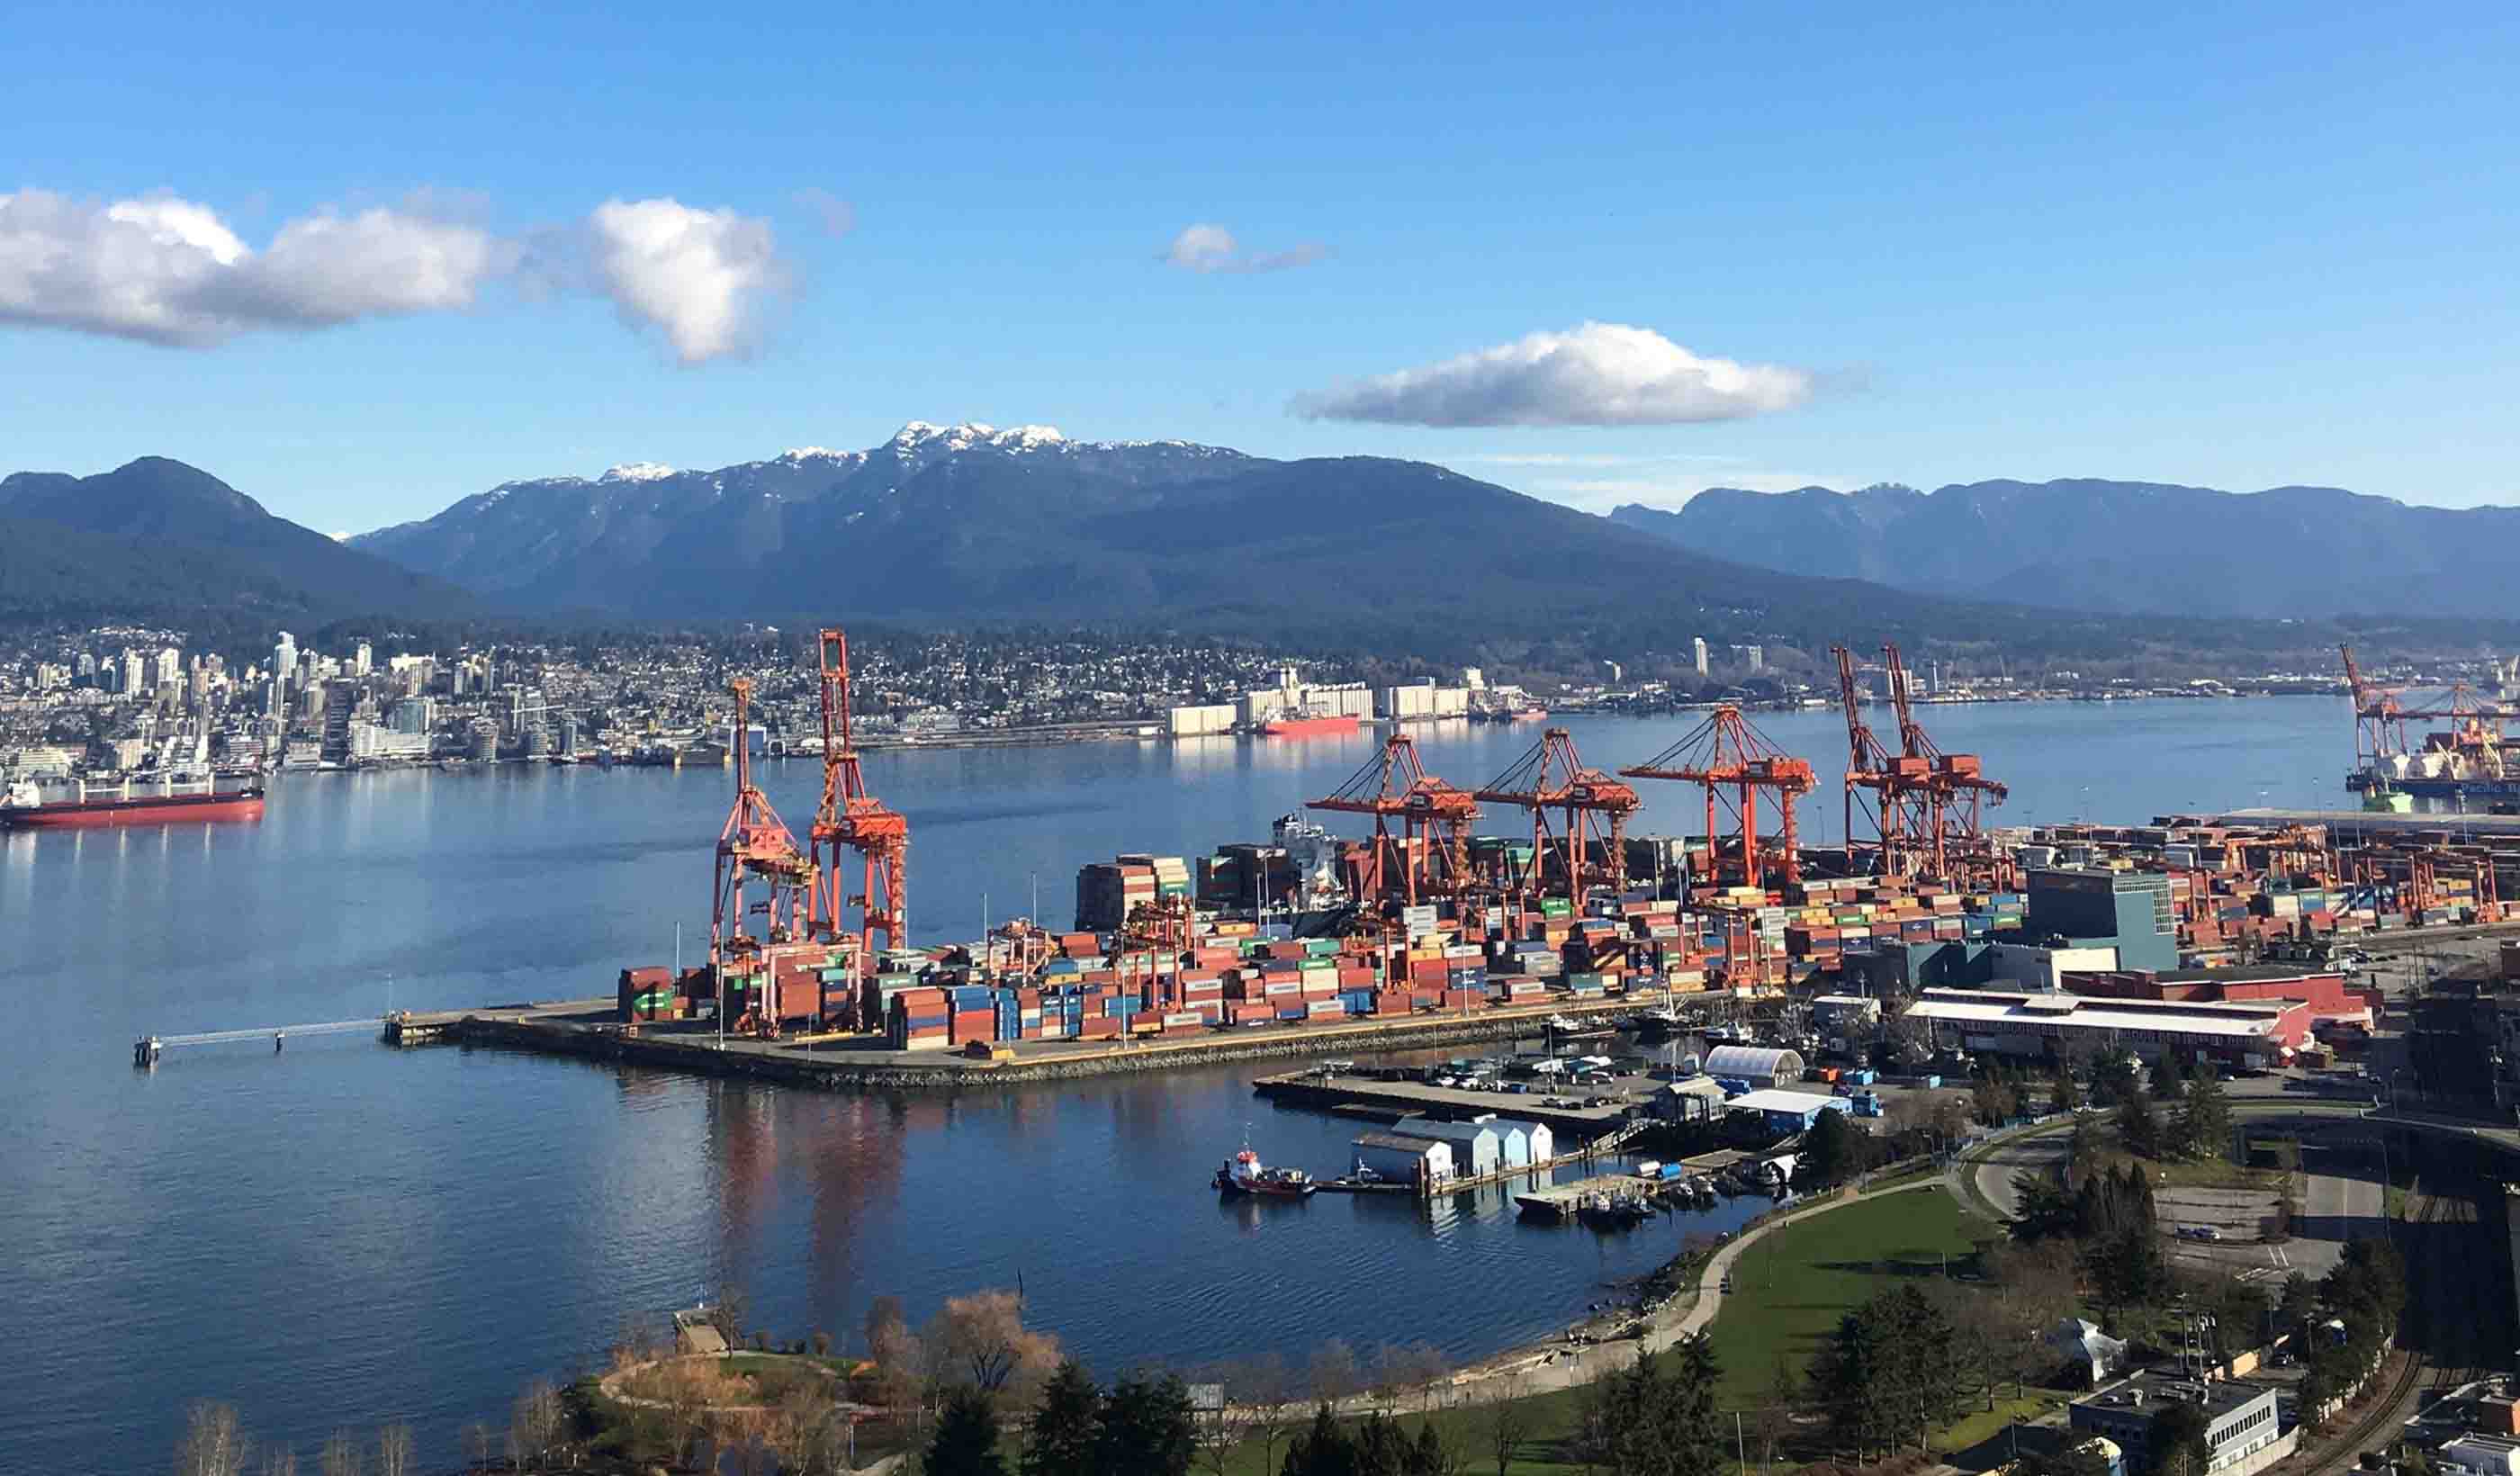 A trip through British Columbia in the life of a shipping container